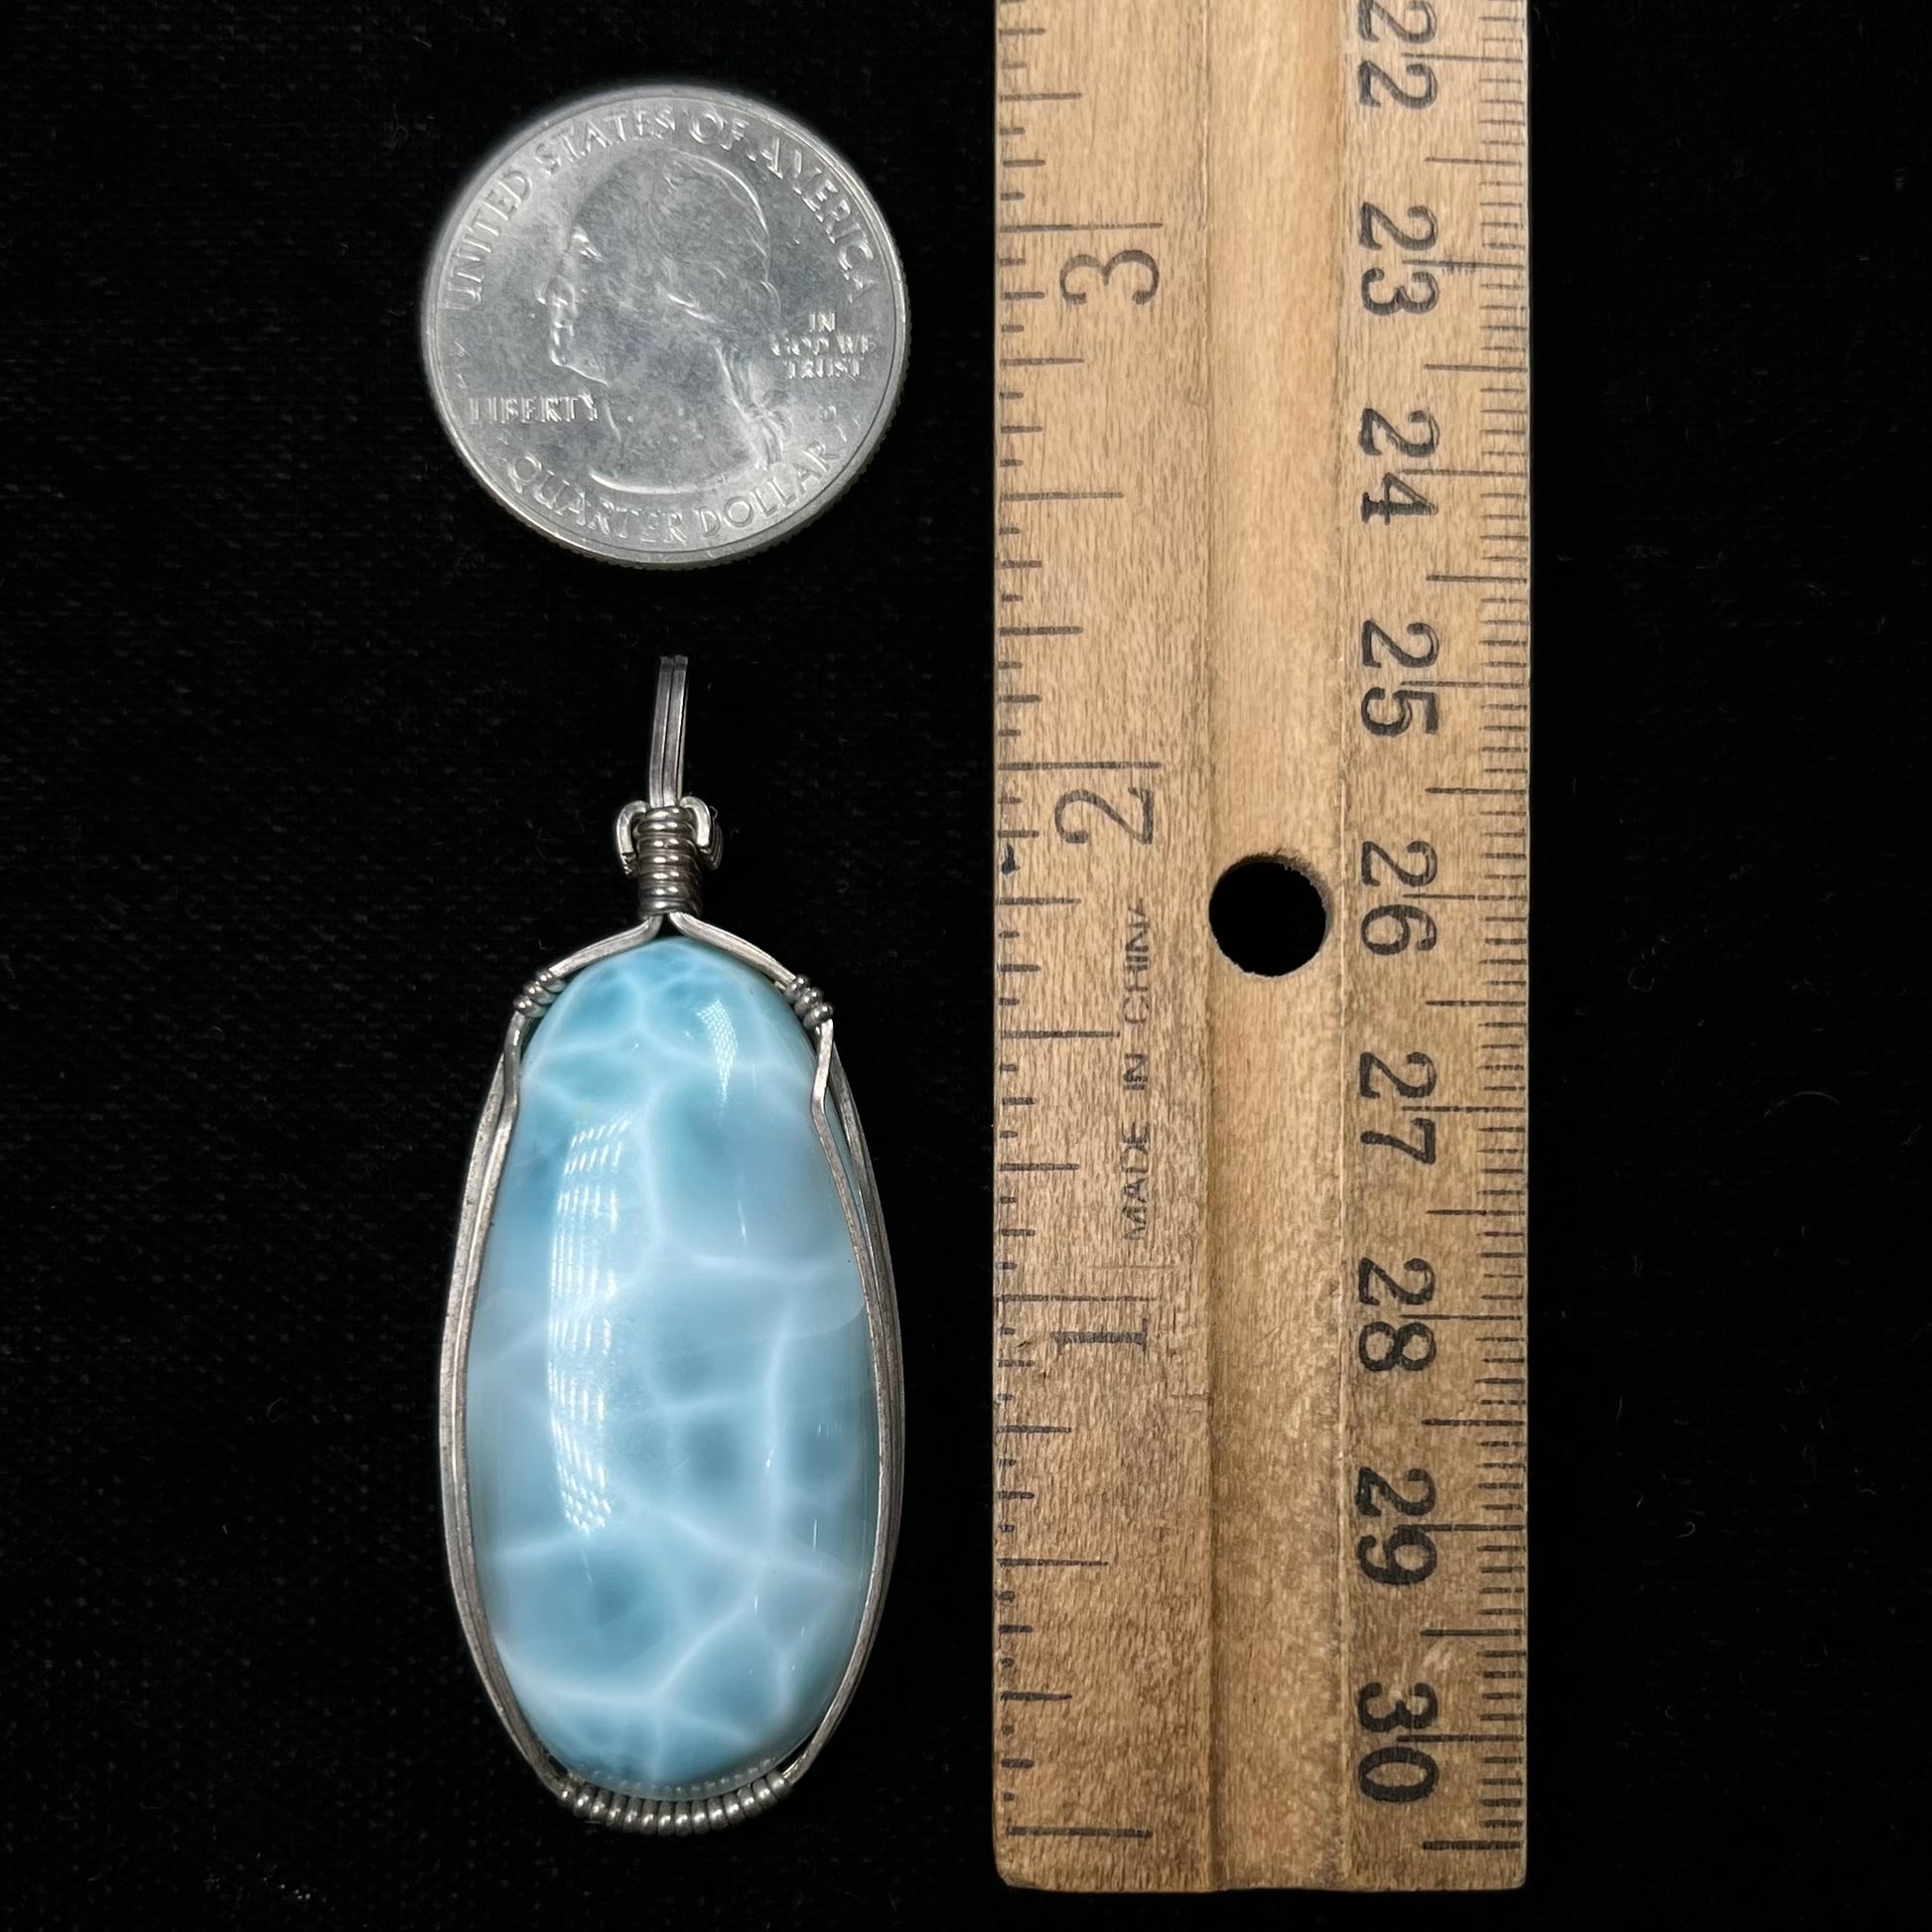 A large, oval cabochon cut blue larimar stone mounted in a sterling silver wire wrapped pendant.